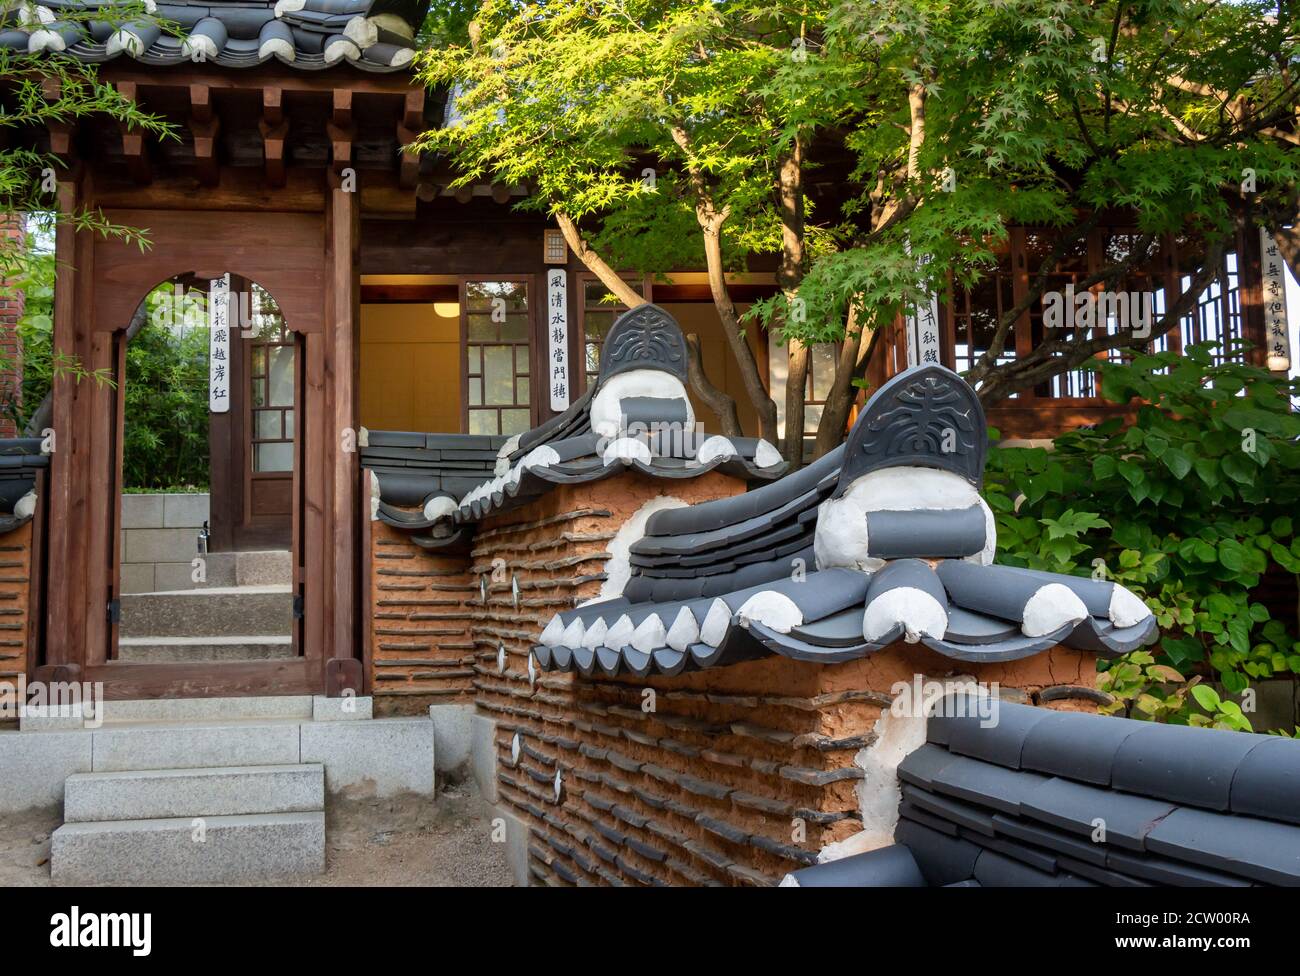 Seoul, South Korea - October 19th 2017: Korean style architecture wall and archway in the Bukchon Hanok Village, Seoul, South Korea Stock Photo